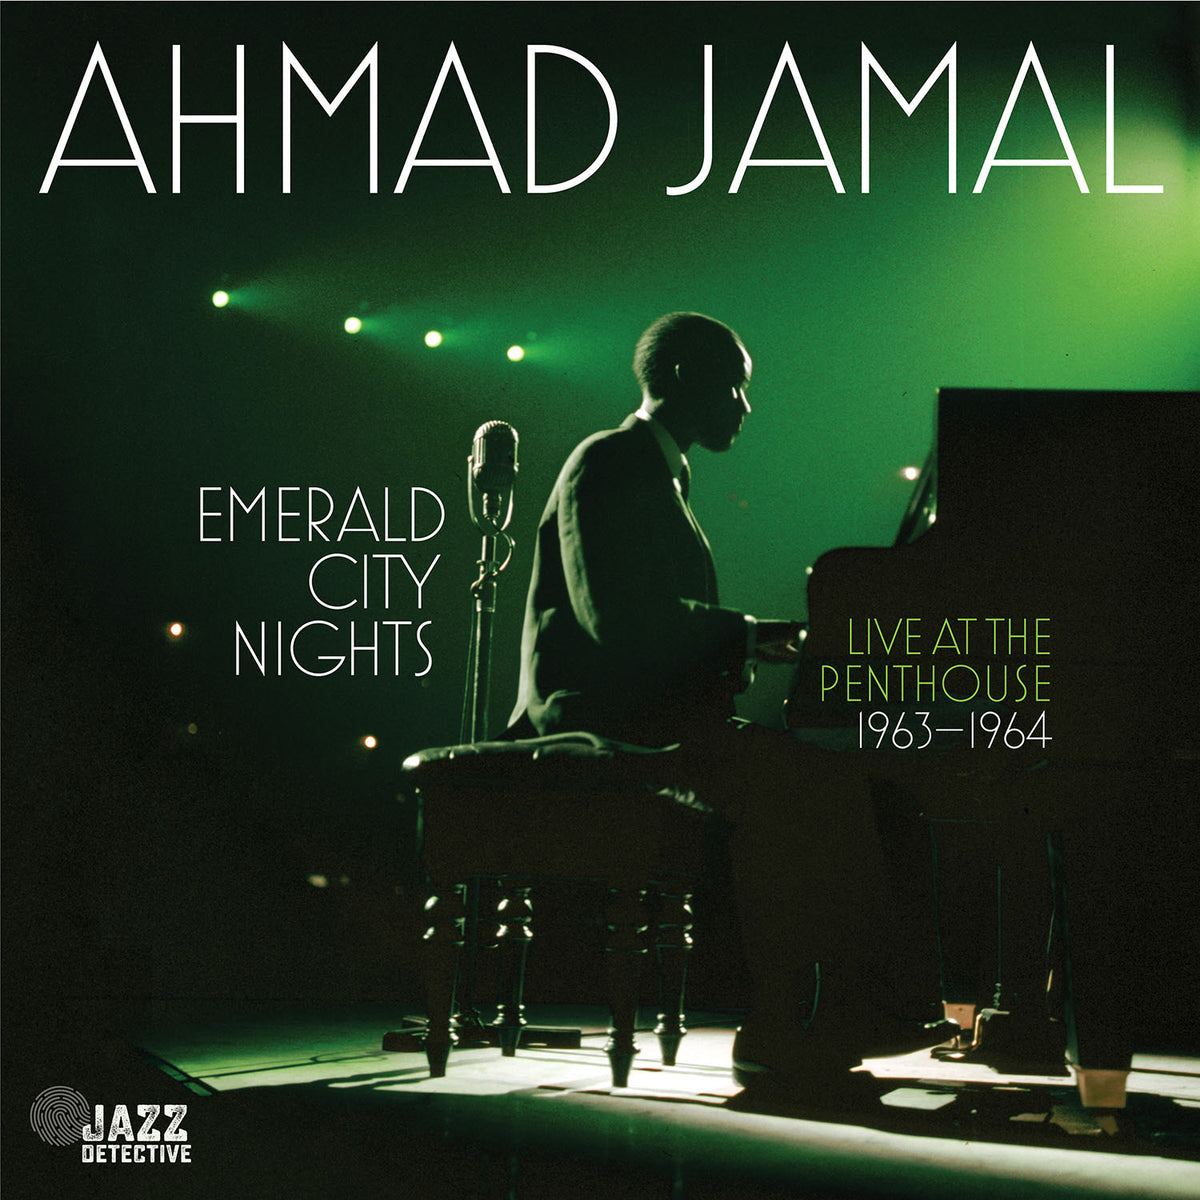 Ahmad Jamal - Emerald City Nights: Live At The Penthouse (1963-1964) 2LP (RSD Exclusive)